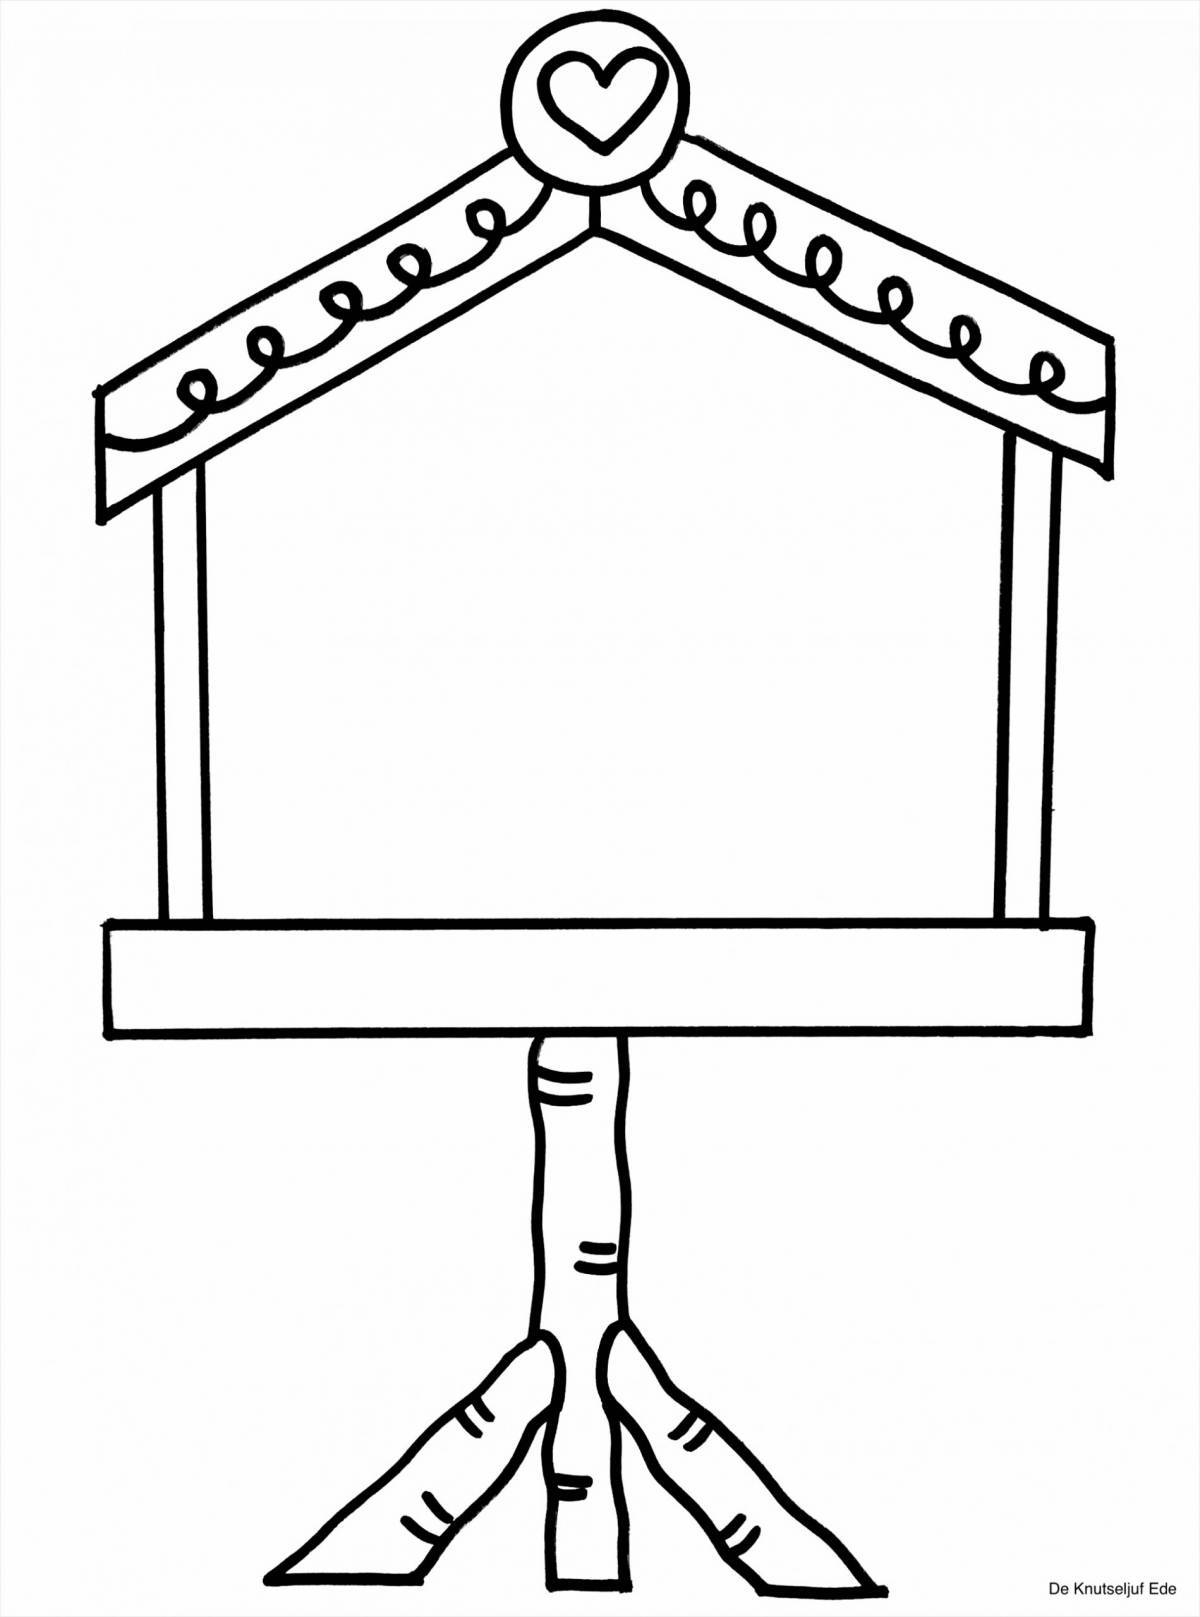 Sweet bird feeder coloring pages for kids